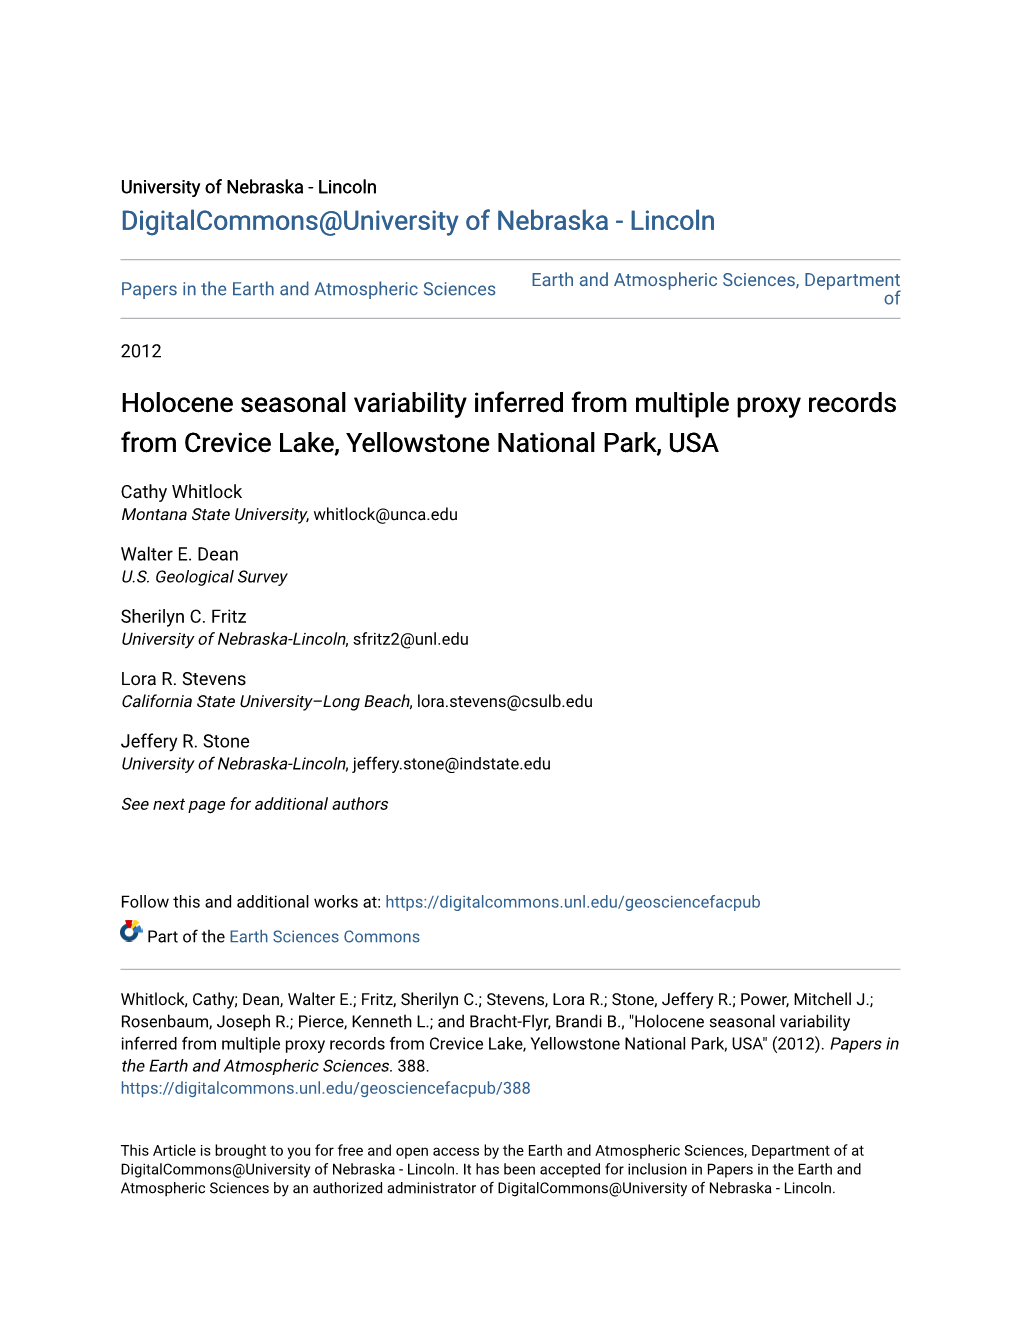 Holocene Seasonal Variability Inferred from Multiple Proxy Records from Crevice Lake, Yellowstone National Park, USA